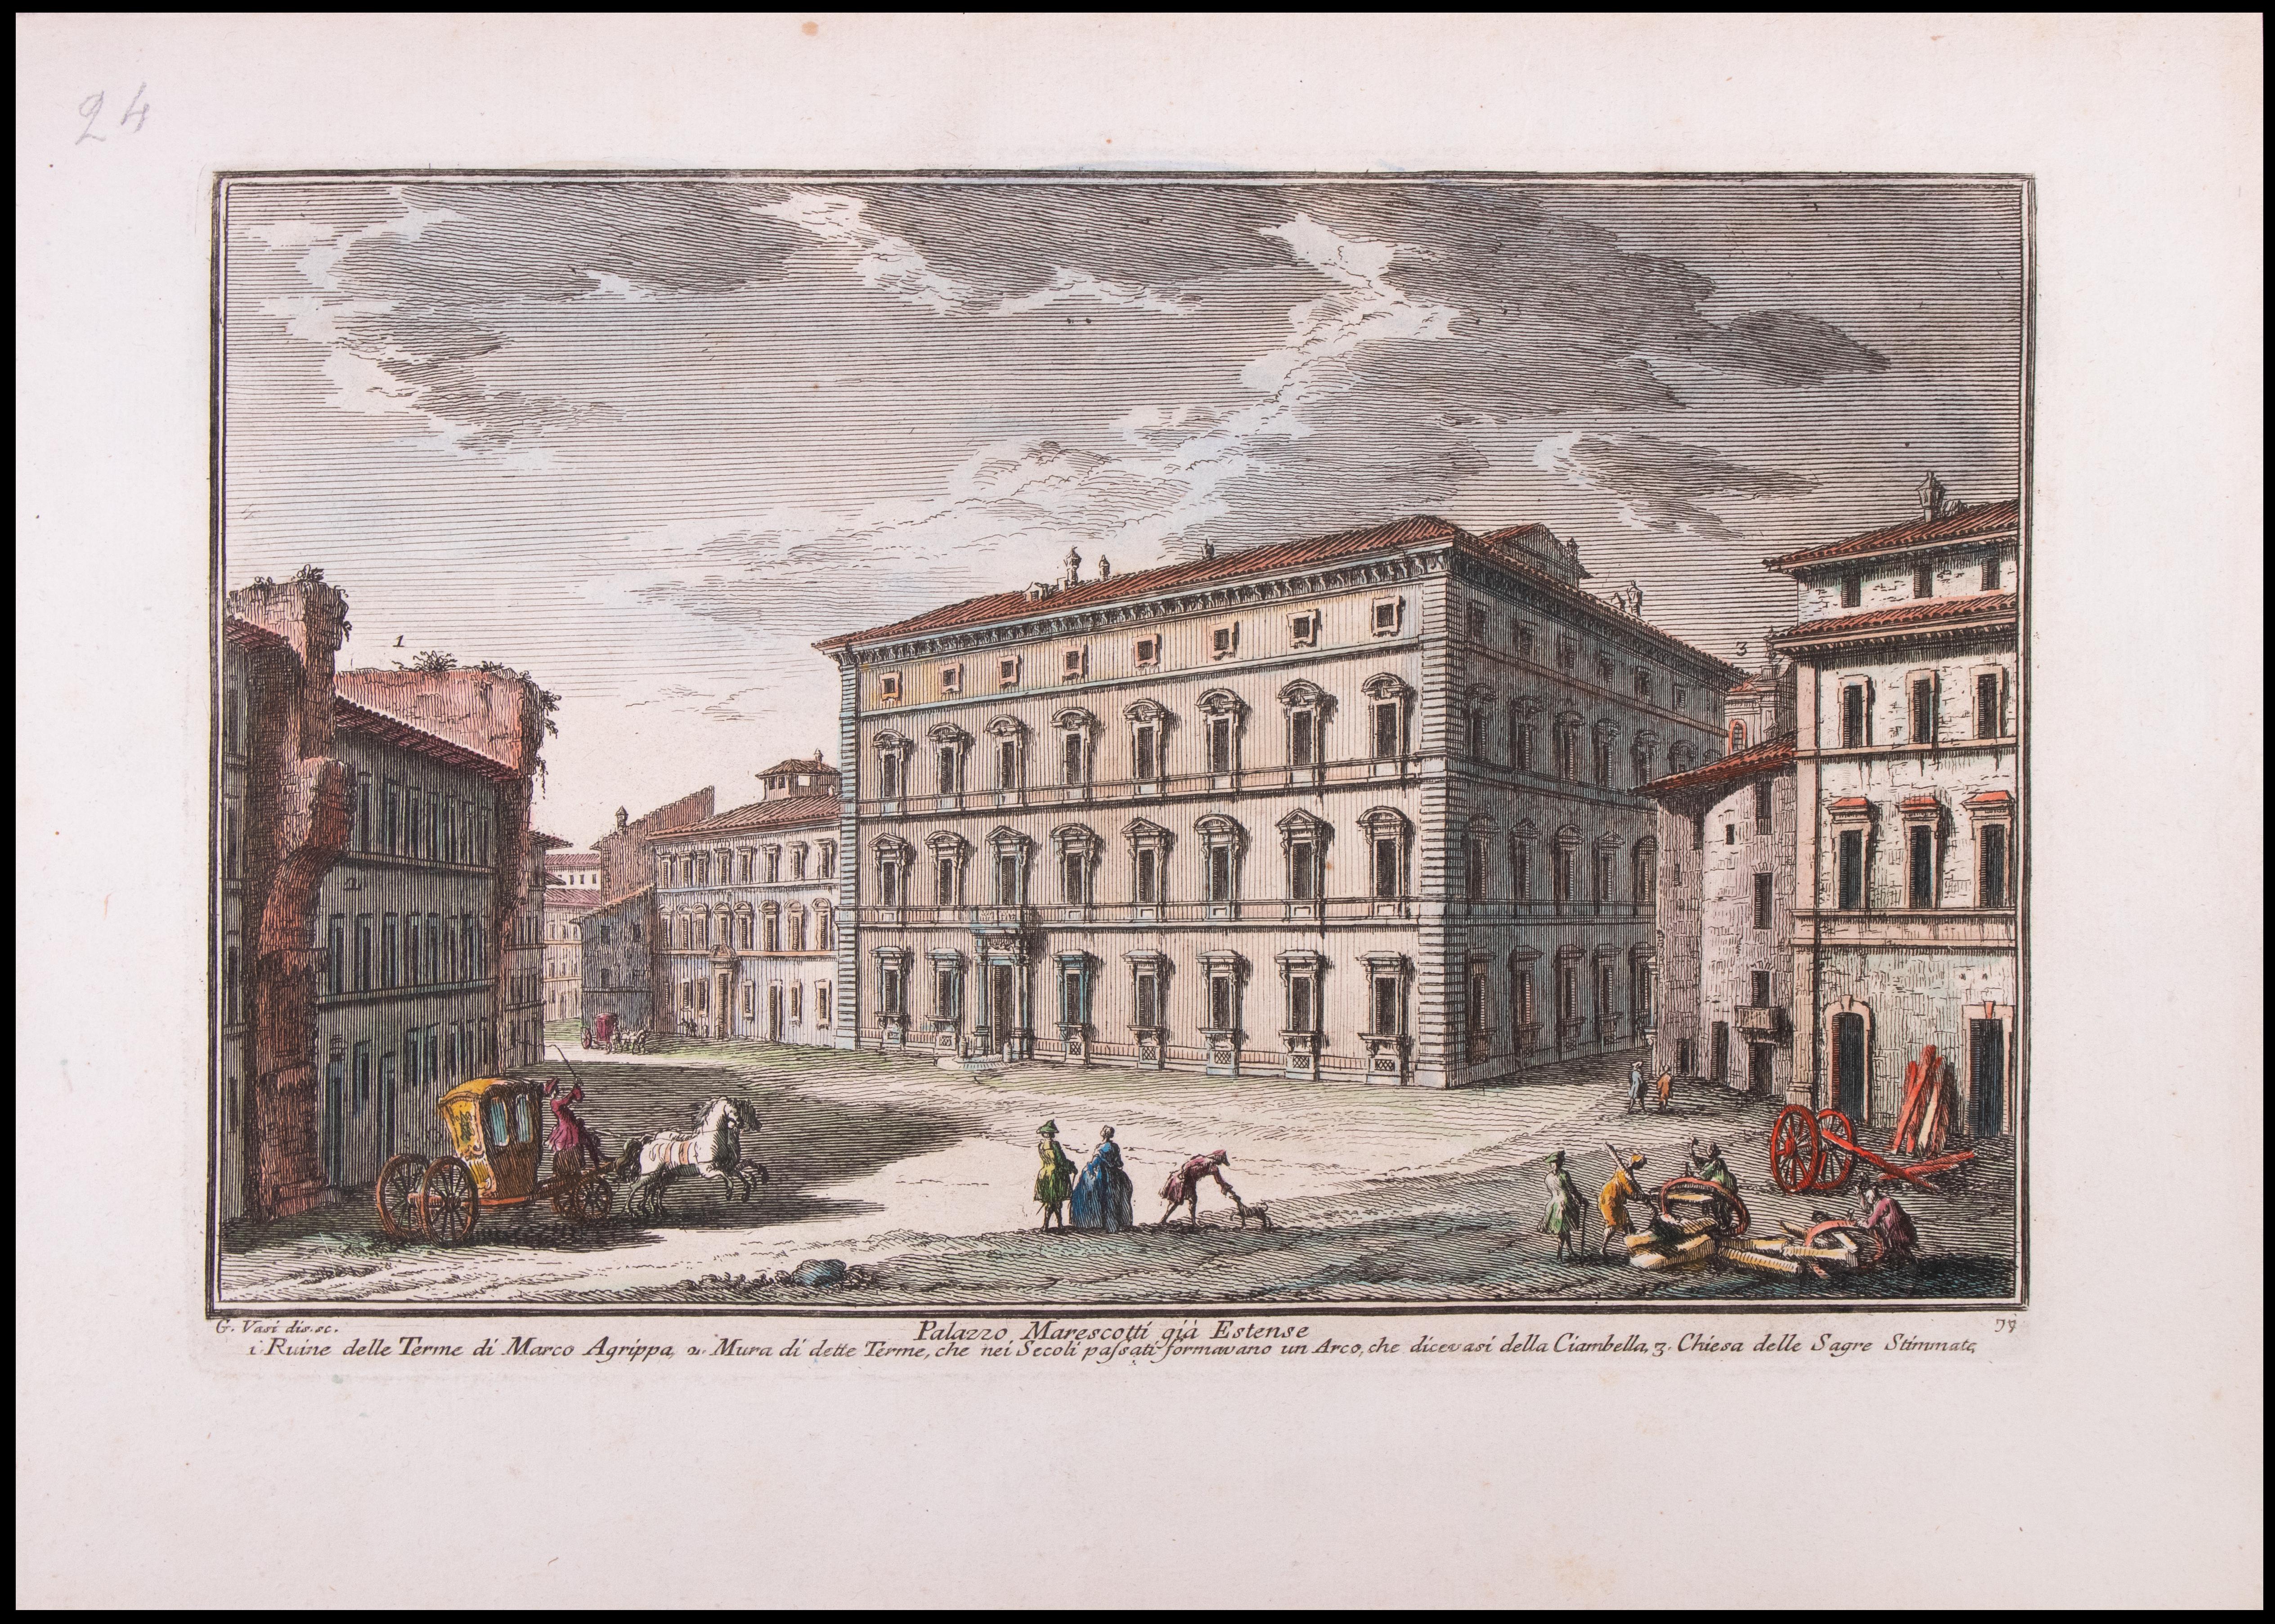 Palazzo Marescotti gia Estense is an etching of the Late 18th century realized by Giuseppe Vasi.

Signed and titled on plate lower margin. 

Good conditions except for consumed margins.

Giuseppe Vasi  (Corleone,1710 - Rome, 1782) was an engraver,